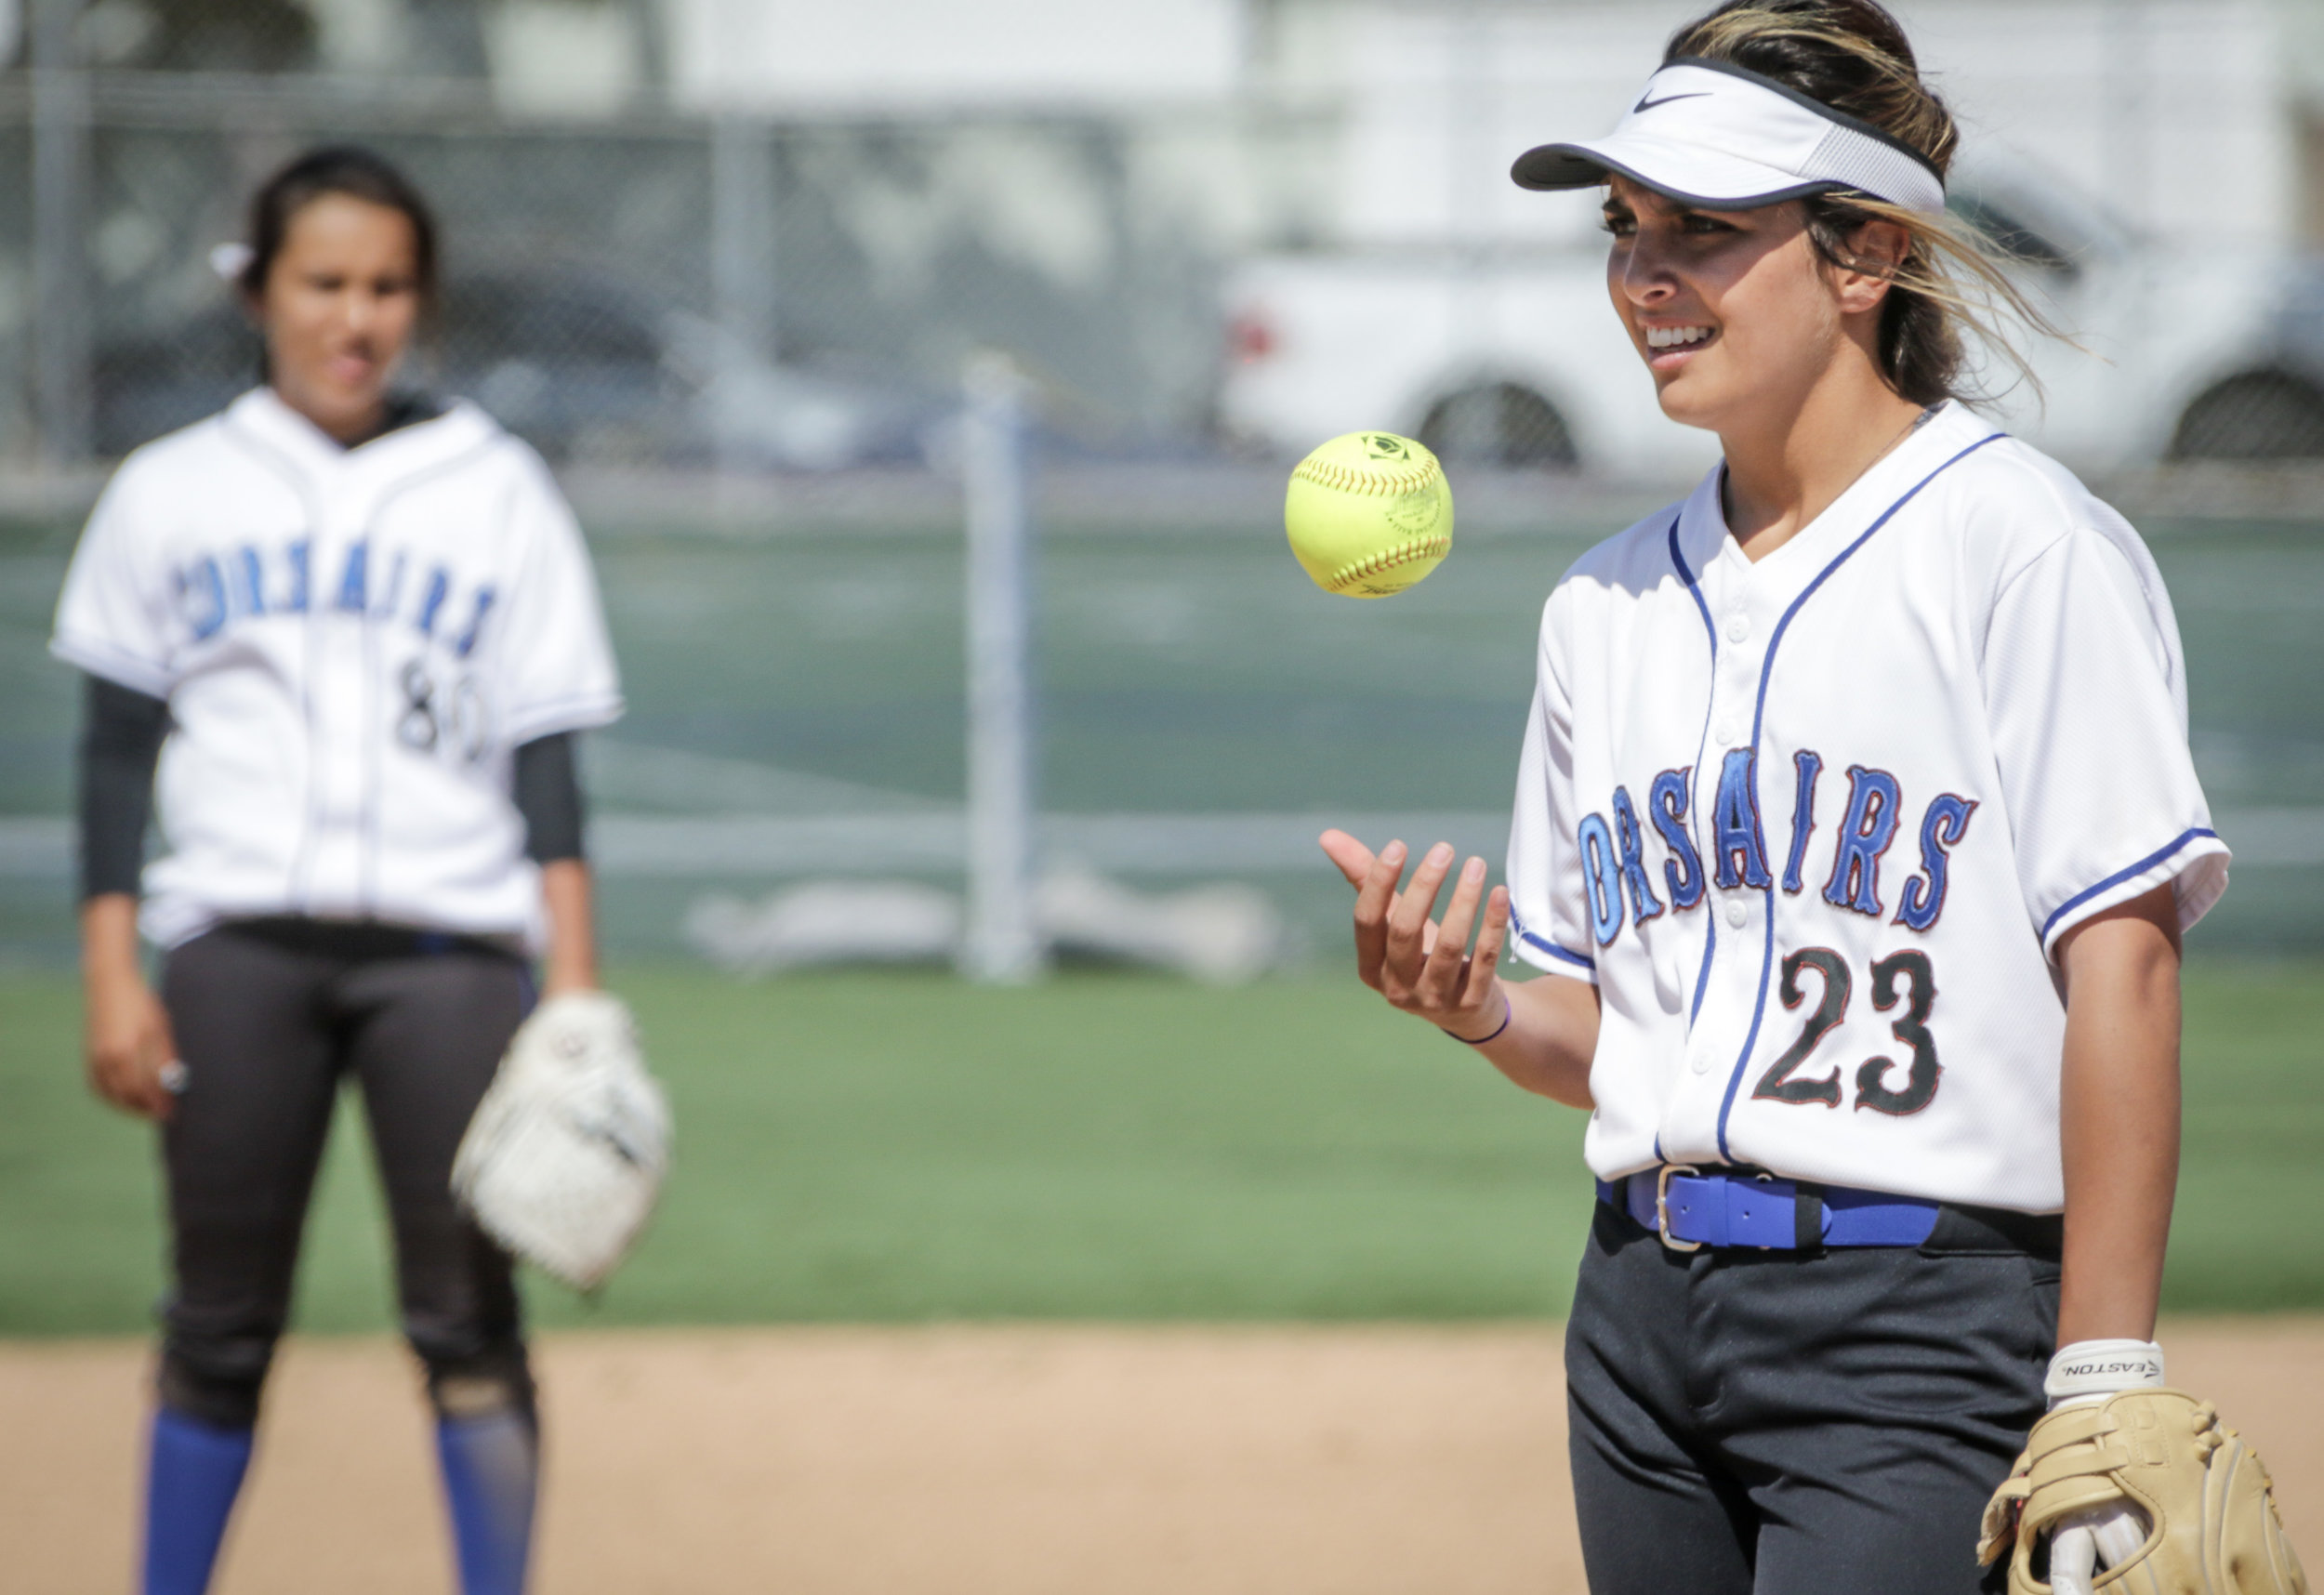  Santa Monica College Corsair softball team pitcher Taylor Liebesman taking a moment to throw her pitch as her teammate looks on during their game against Oxnard  College on thursday, April 19th, 2018. The game ended 3-2 in favor for Santa Monica Col